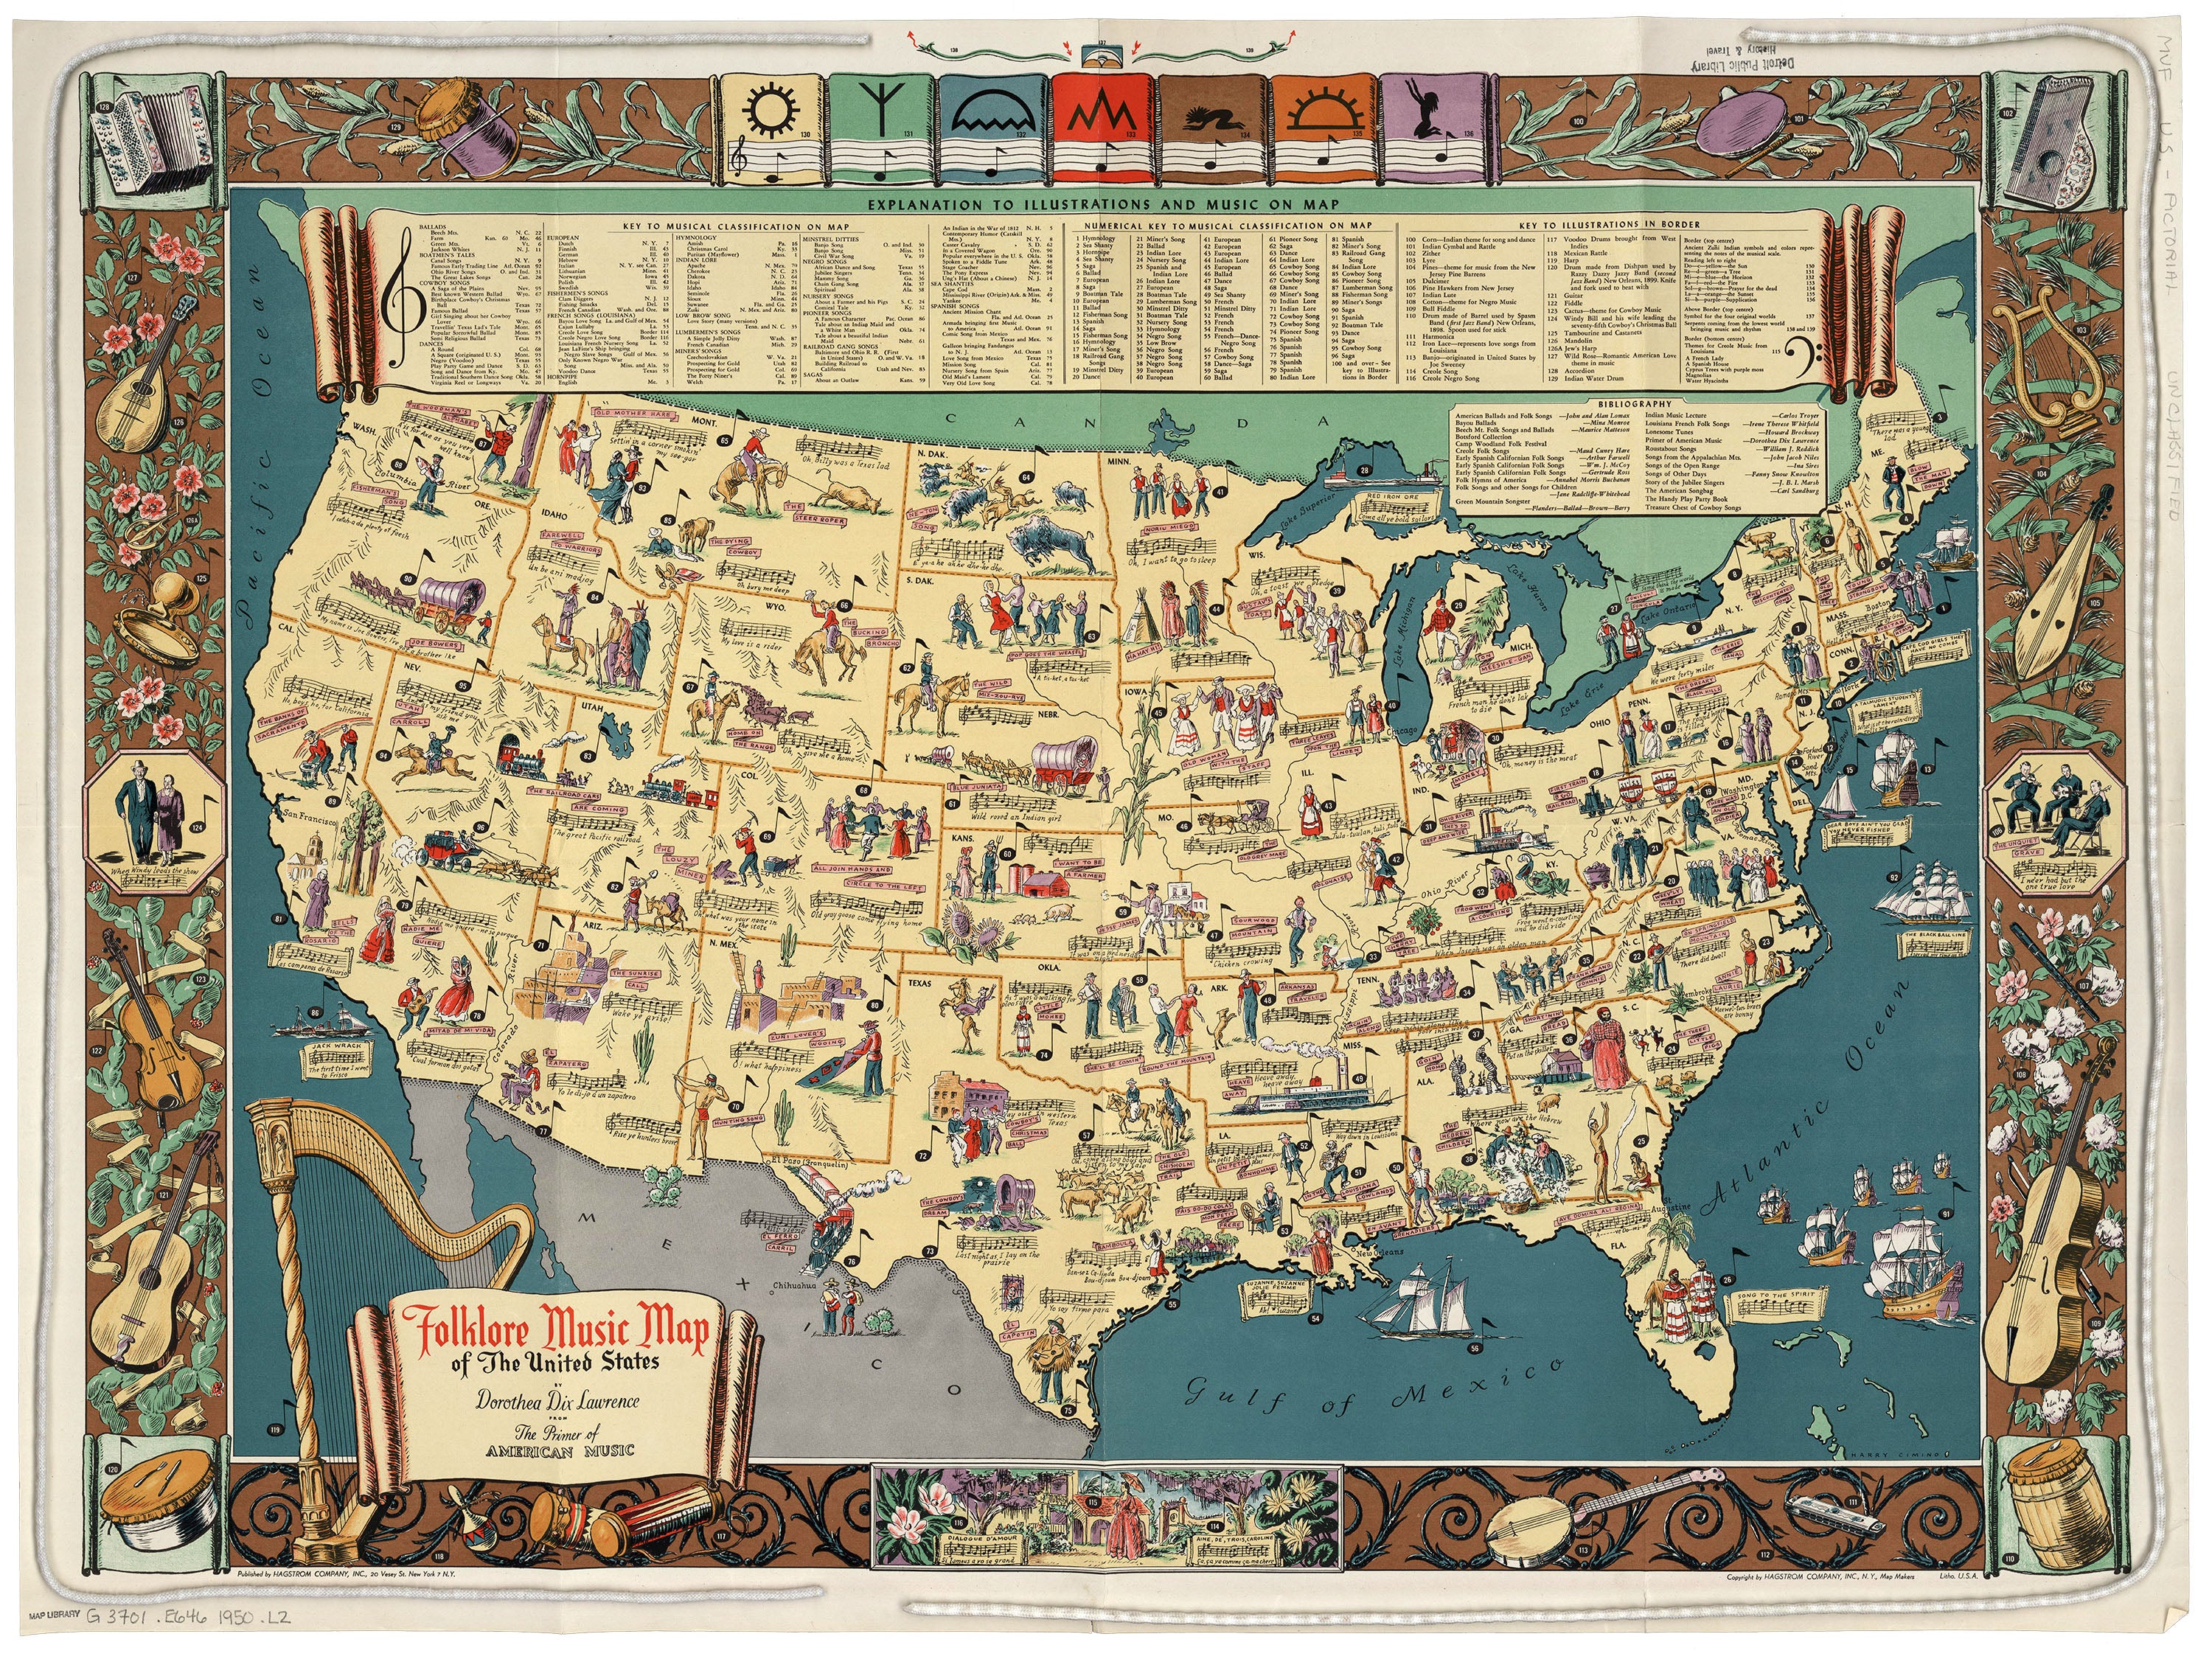 Folklore Music Map of the United States -- a pictorial map printed in 1950.